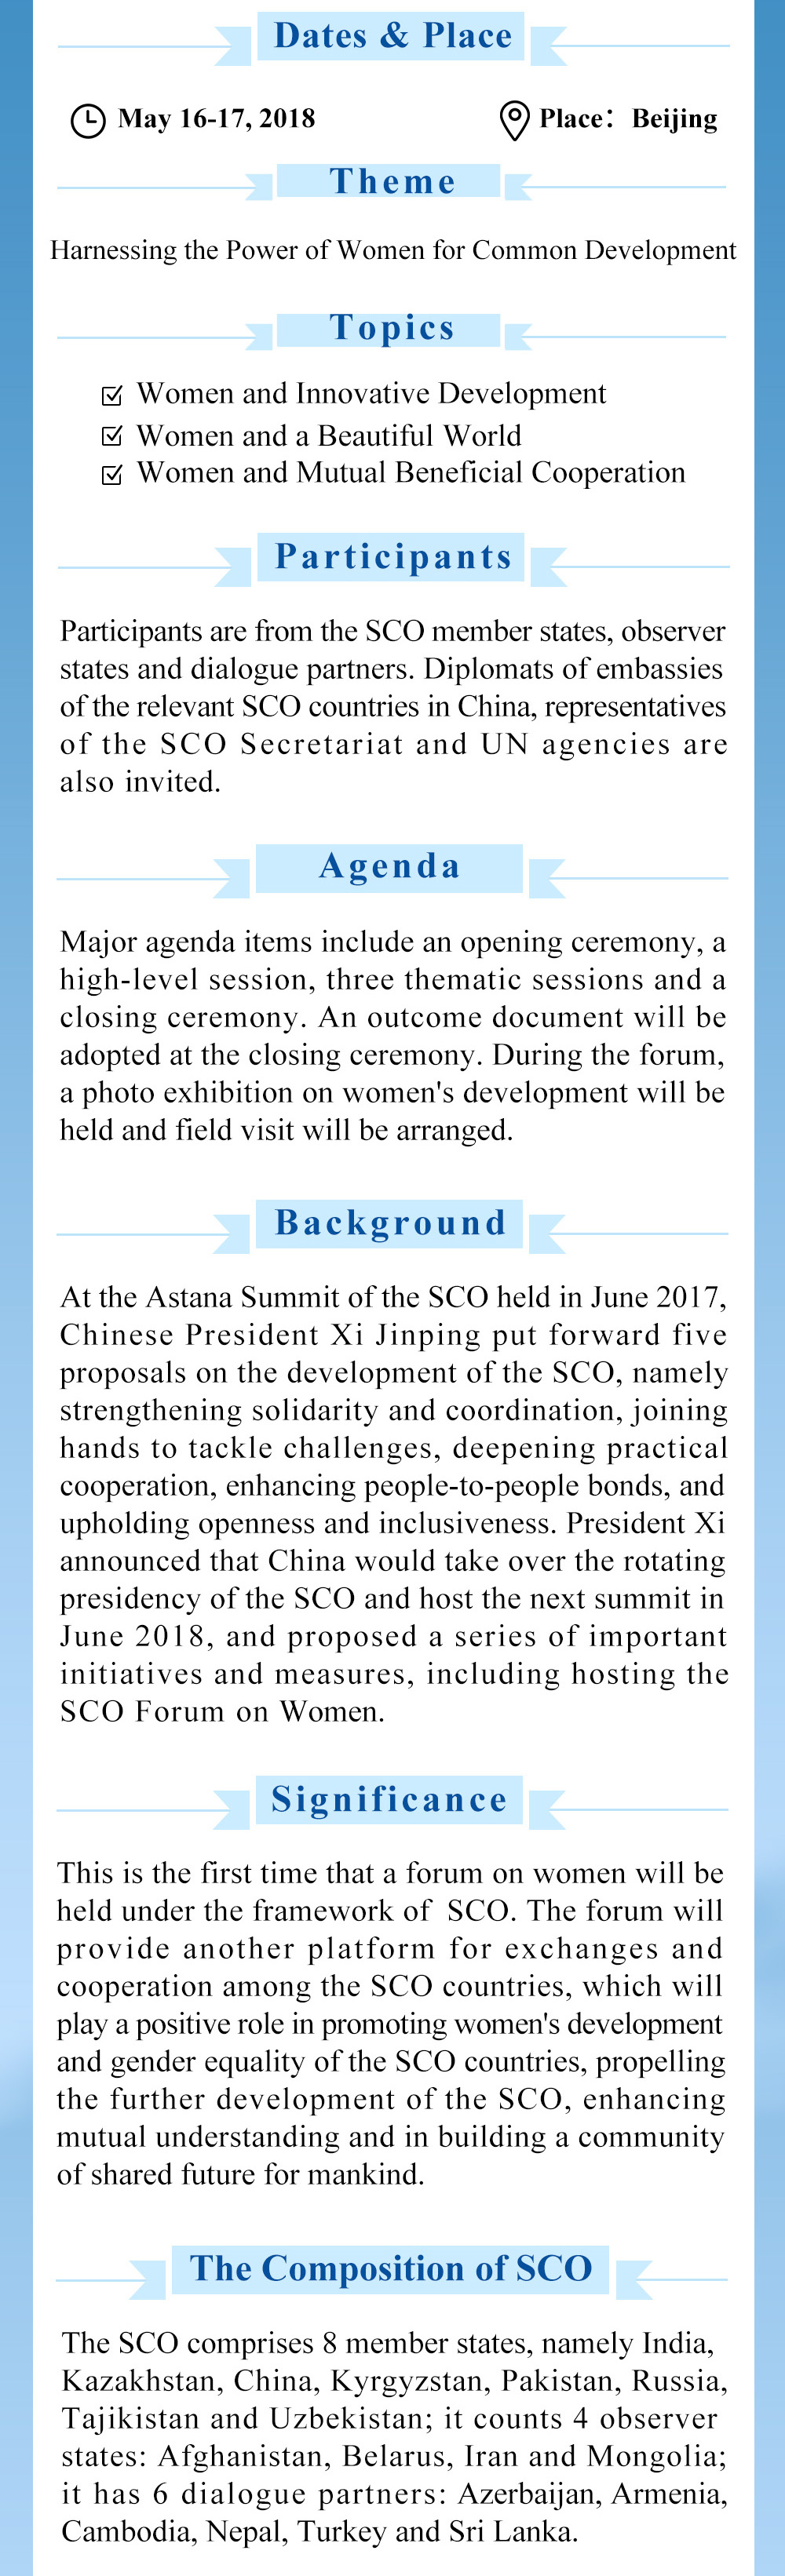 The First SCO Forum on Women to Be Held in Beijing